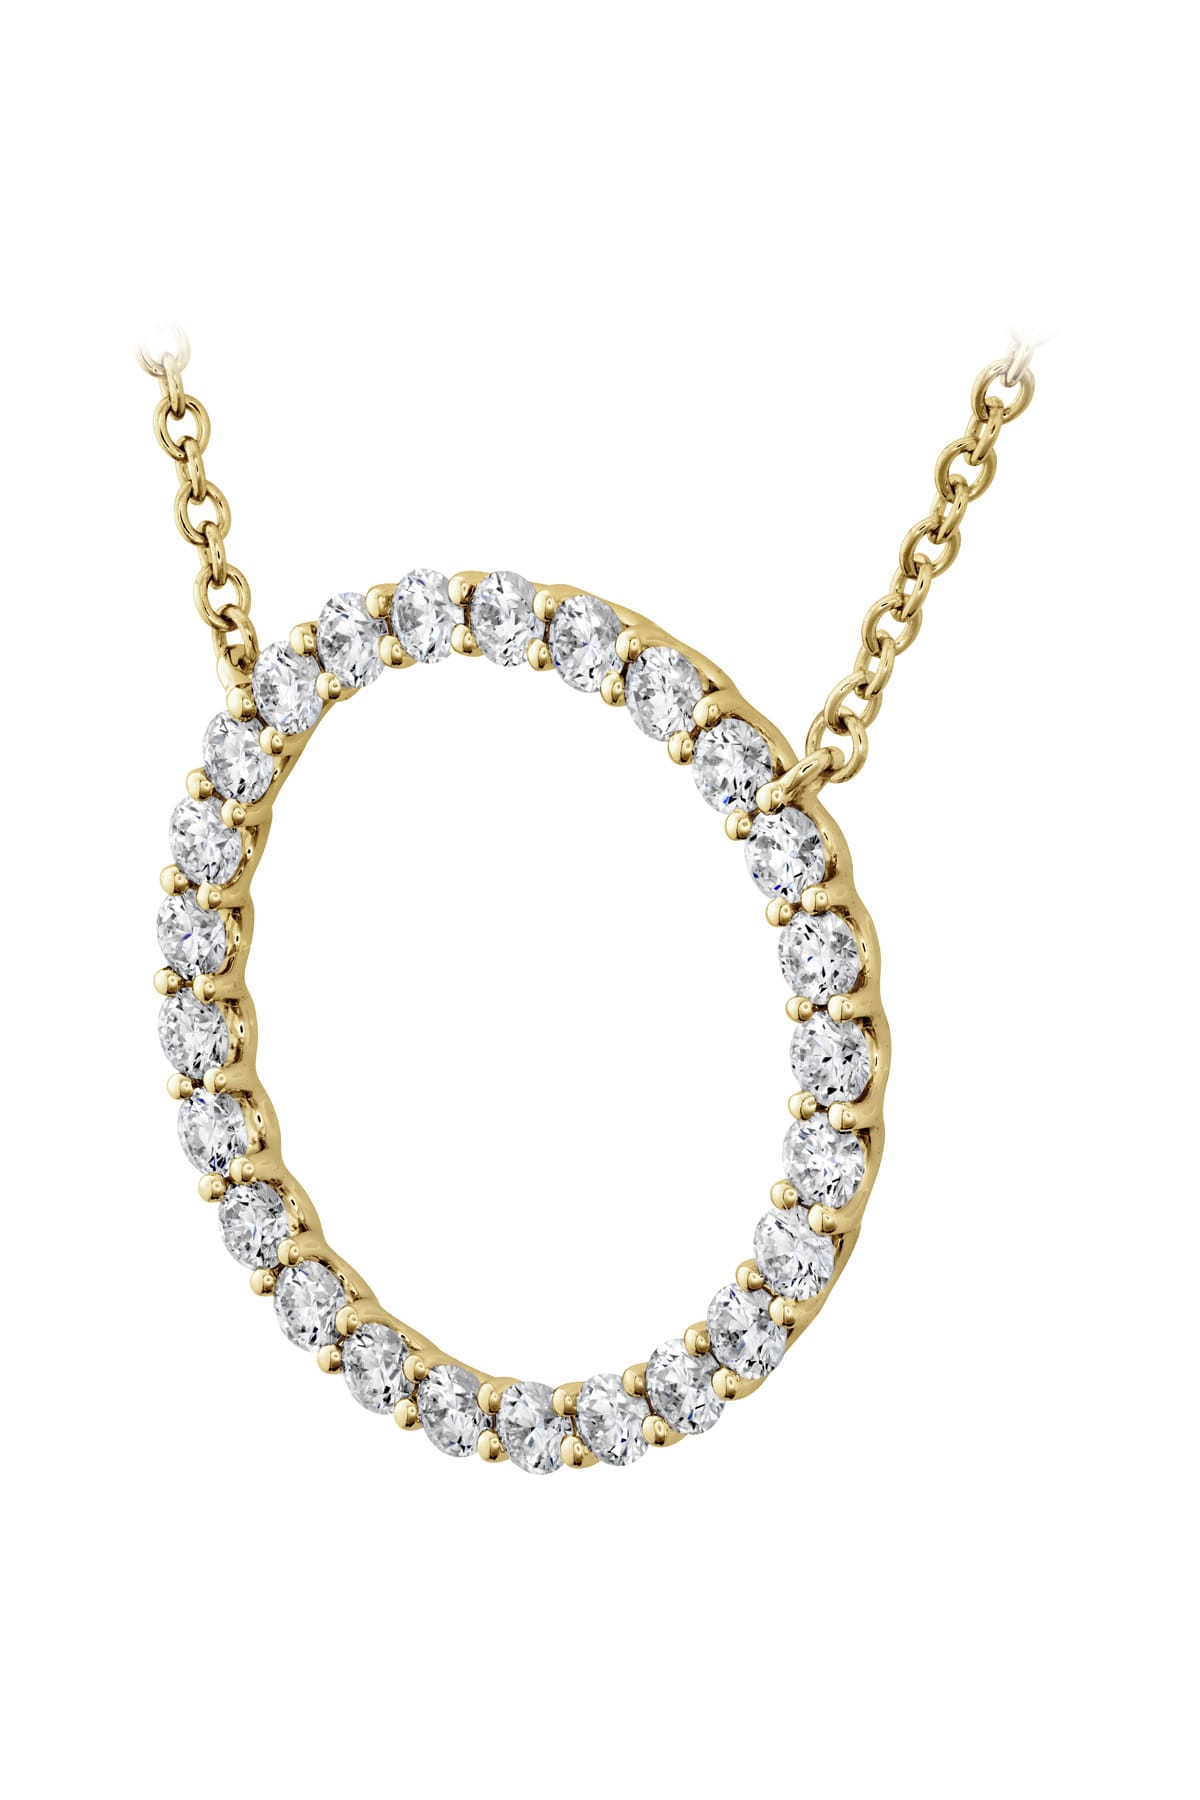 Large Signature Circle Pendant From Hearts On Fire available at LeGassick Diamonds and Jewellery Gold Coast, Australia.